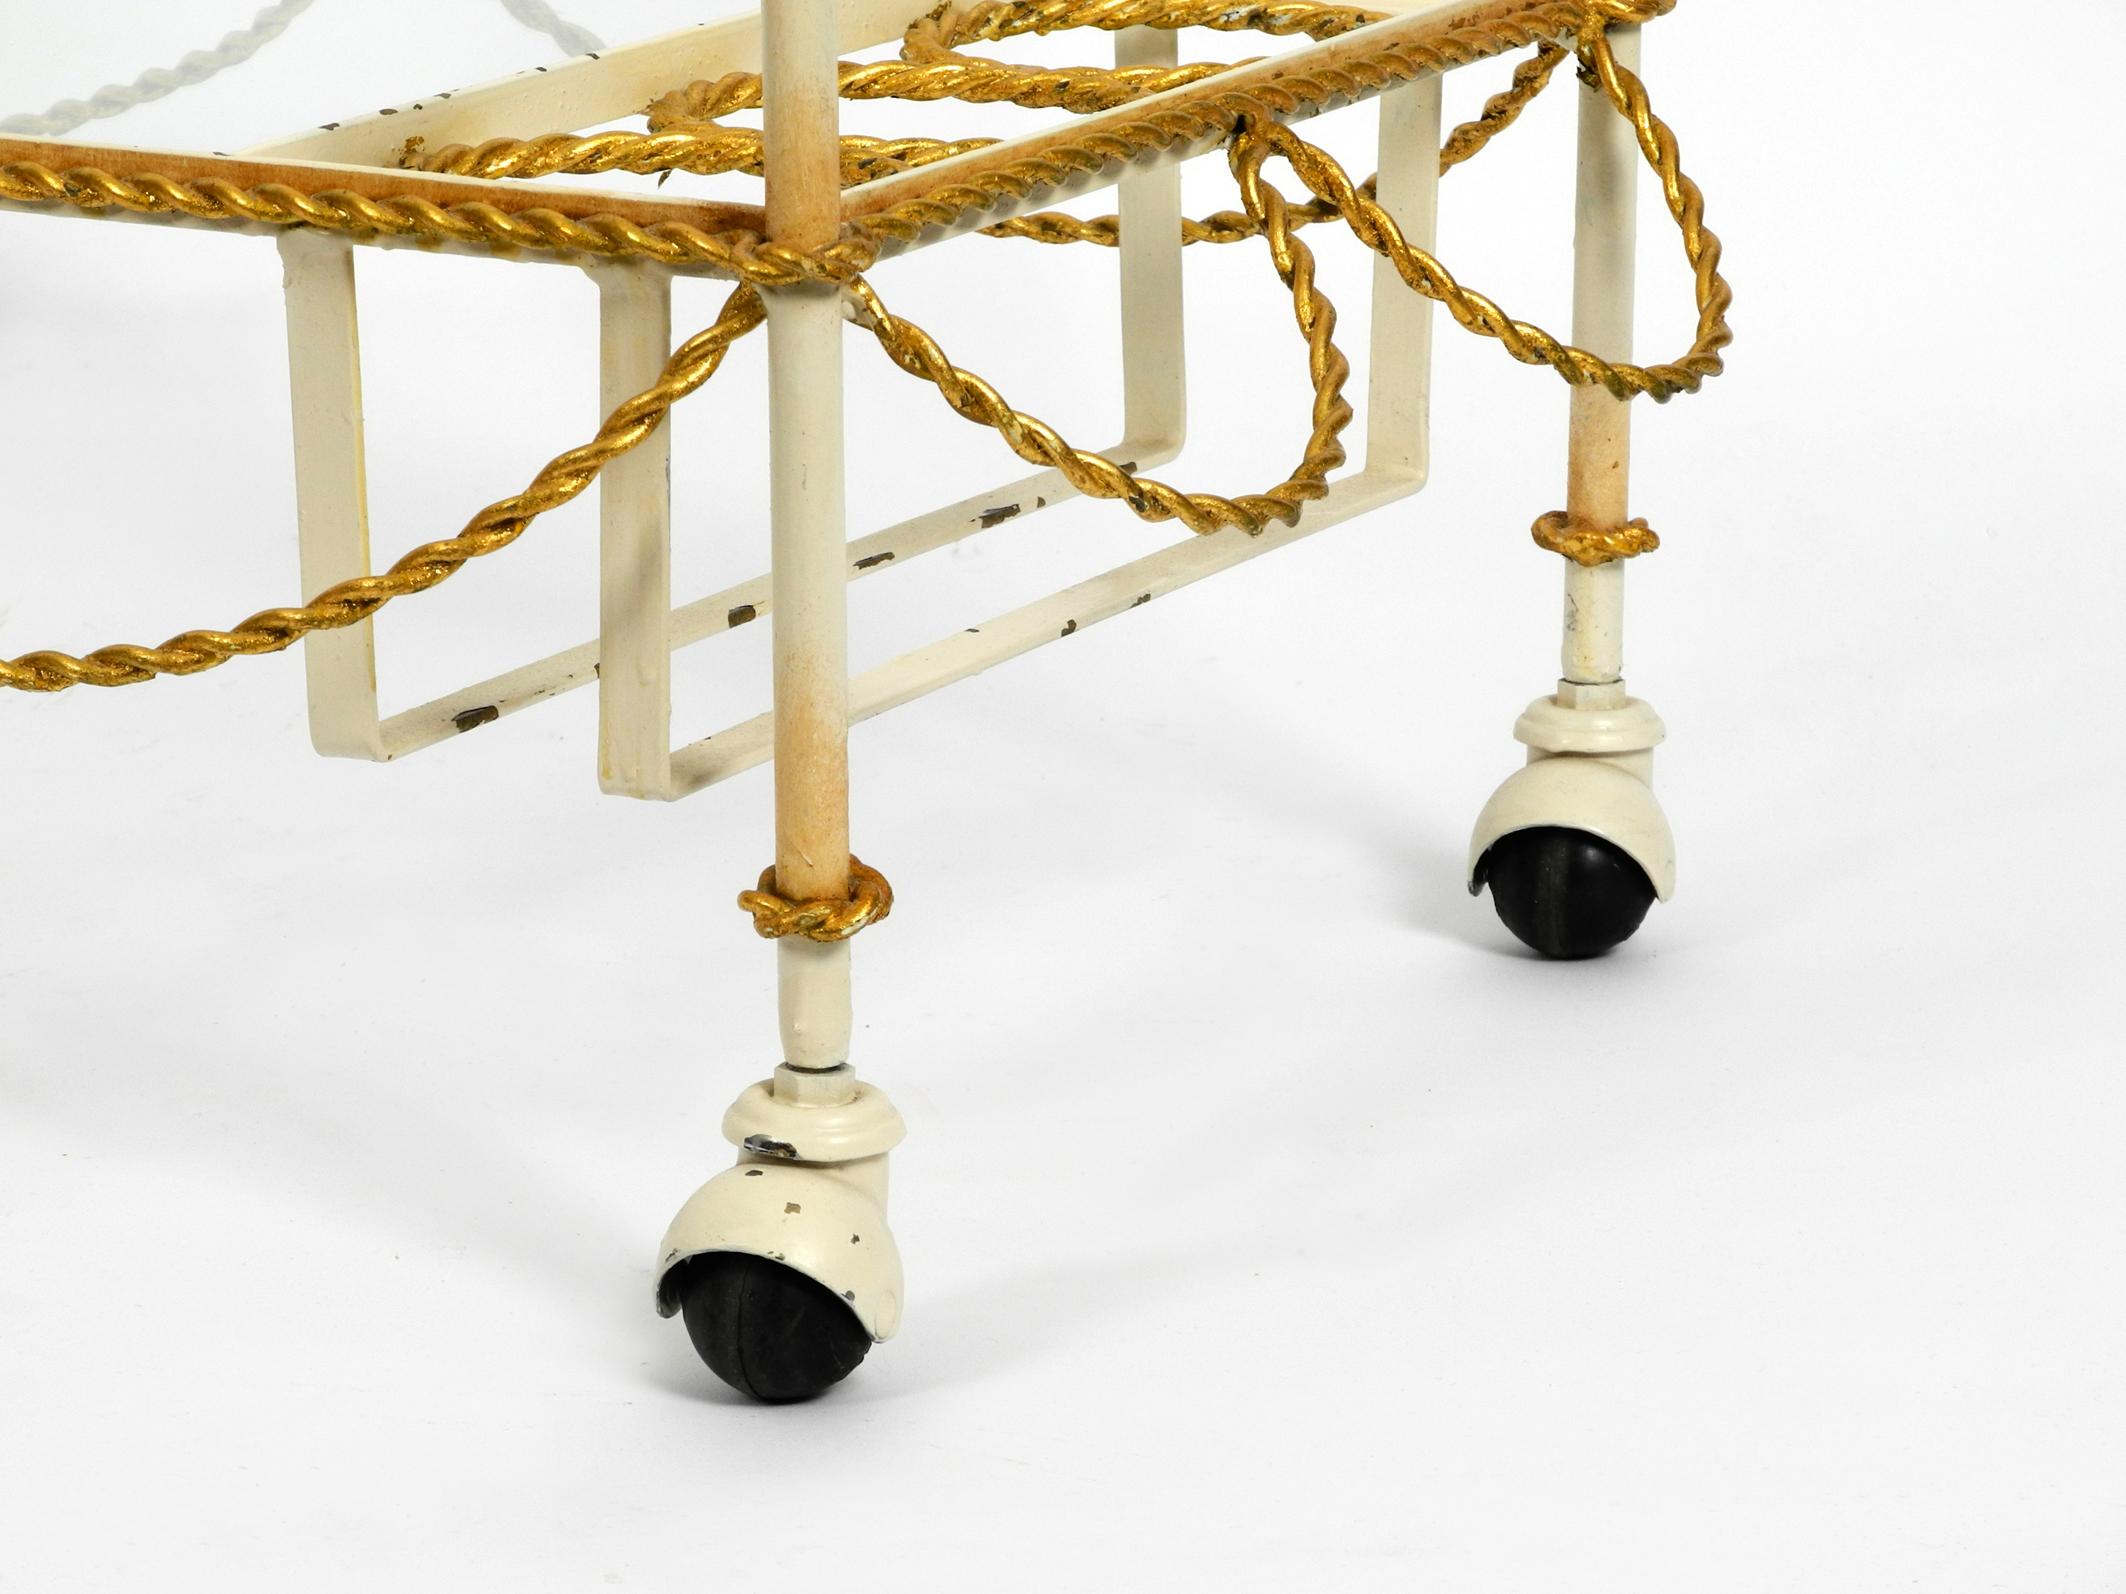 Italian Midcentury Bar Cart Made of Metal in Beige and Gold with Glass Elements For Sale 10